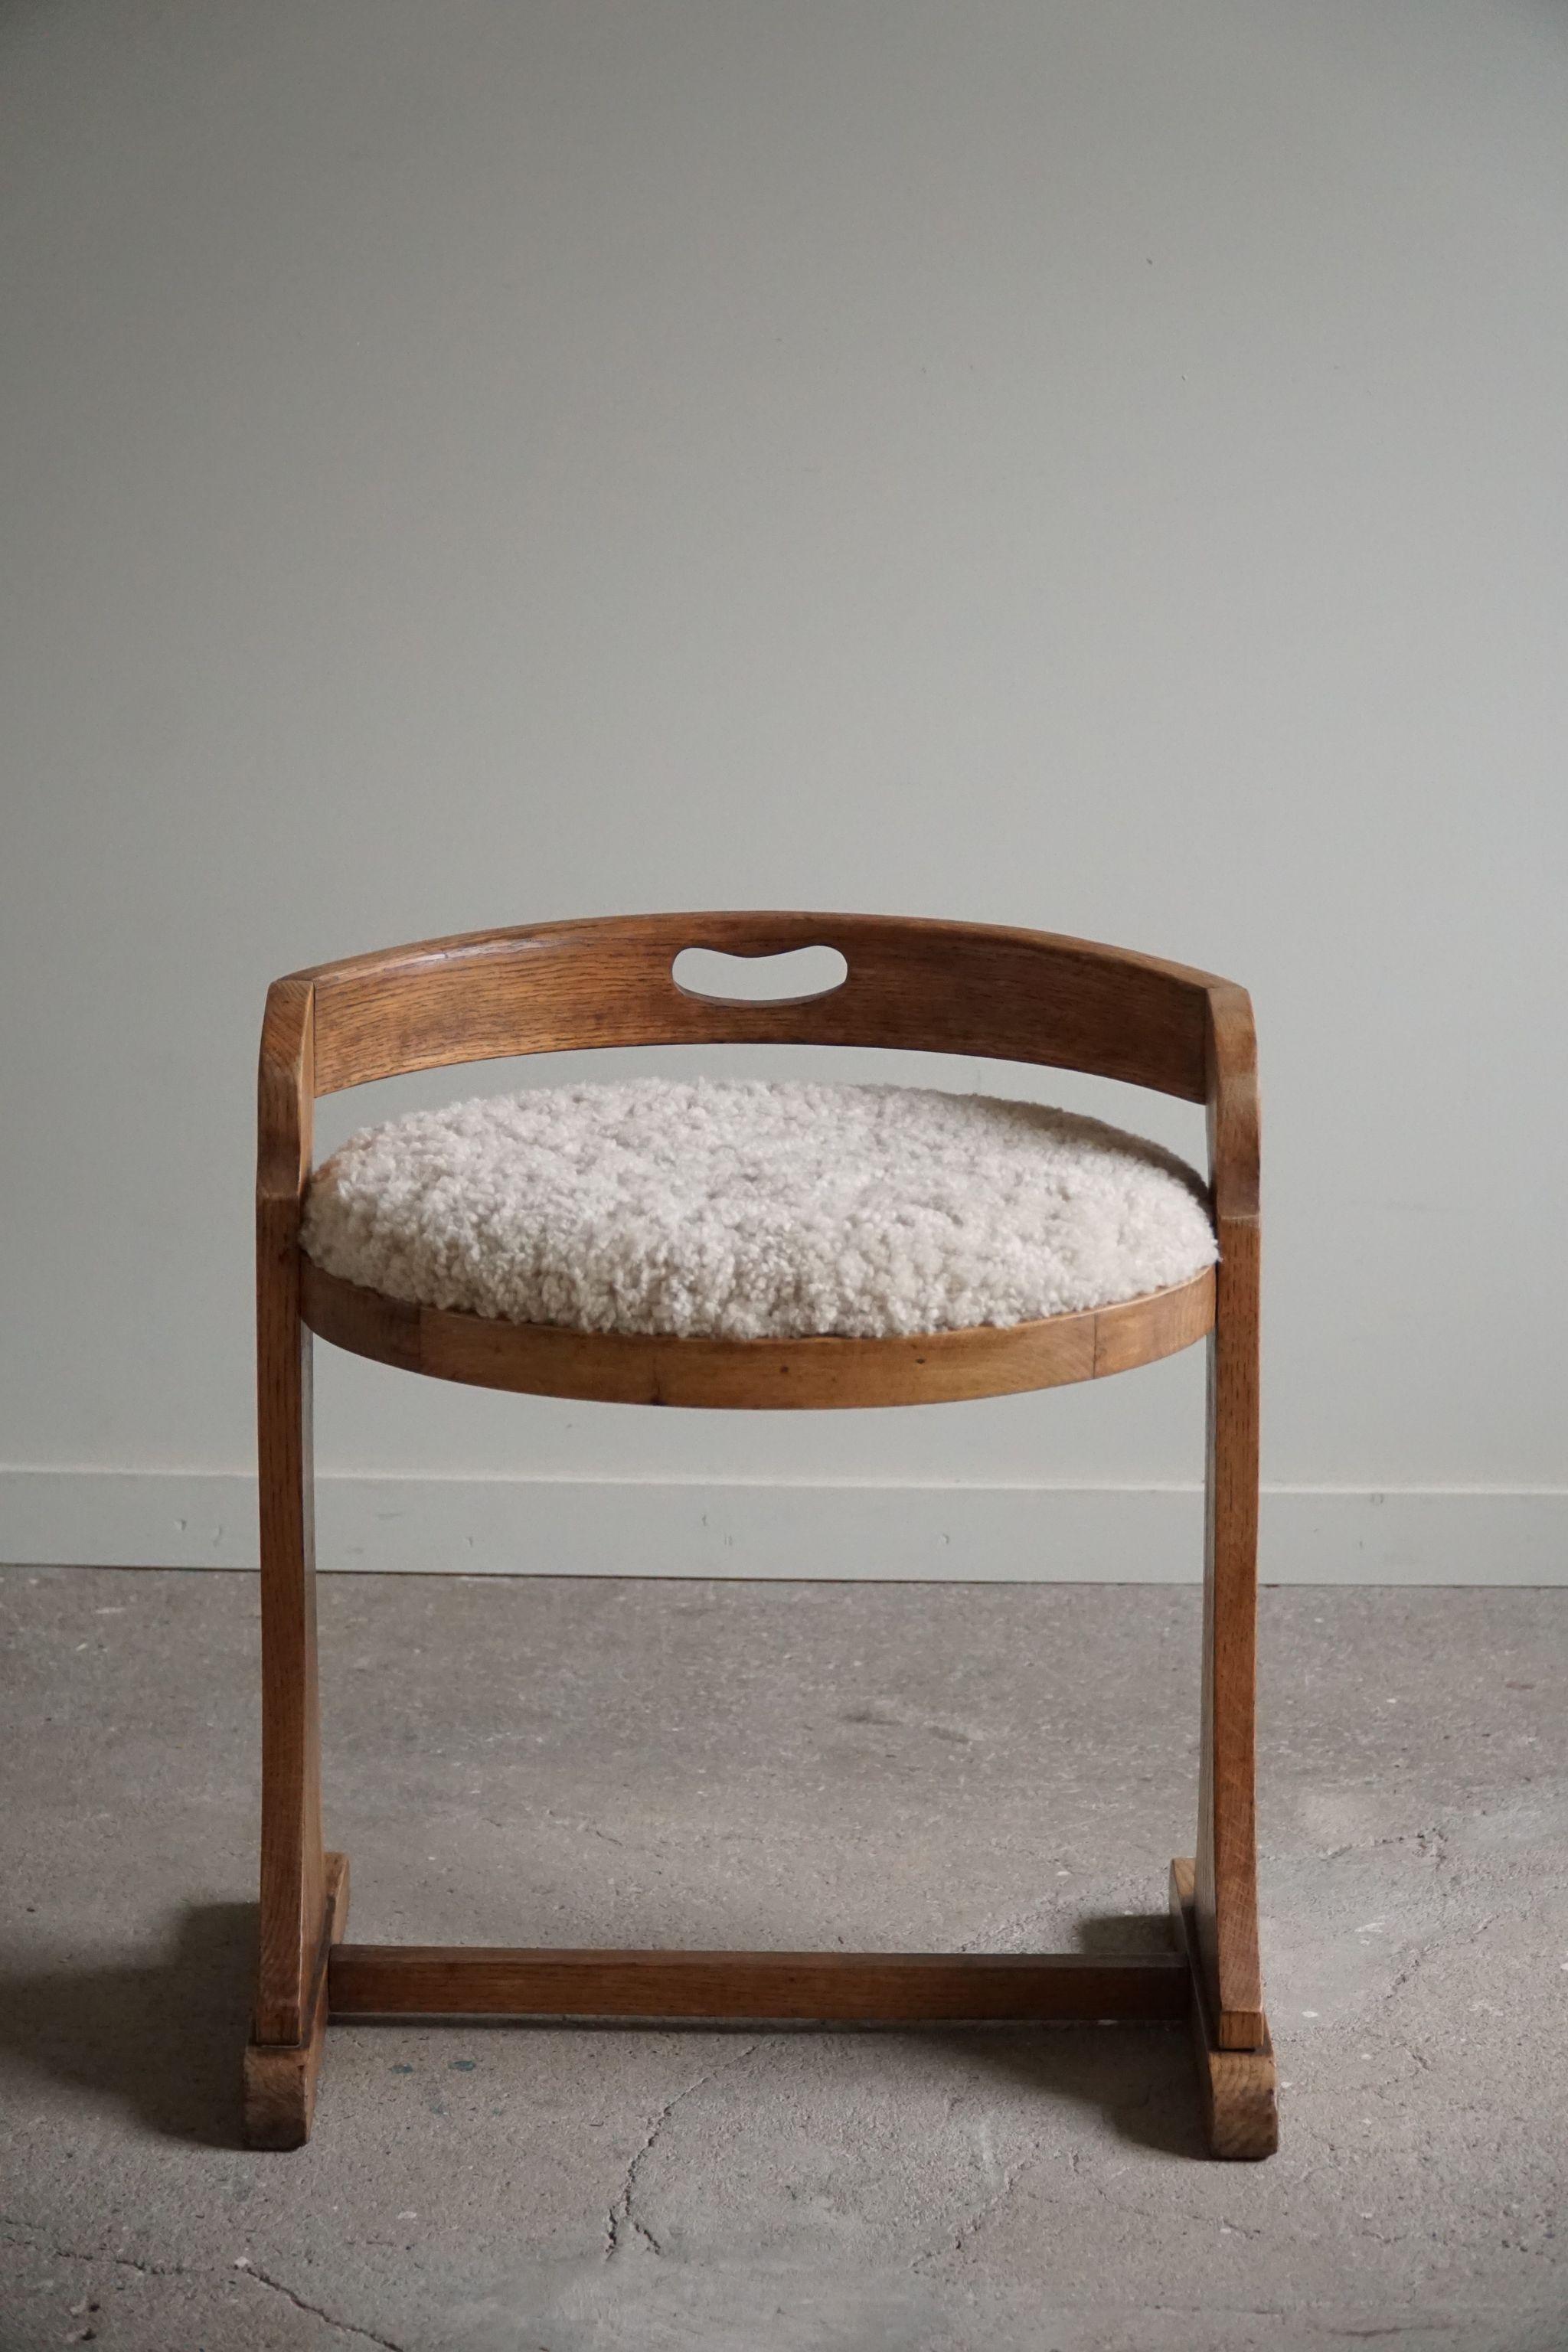 Lambskin Low Back Chair in Oak & Reupholstered in Lambswool, Danish Mid Century, 1950s For Sale